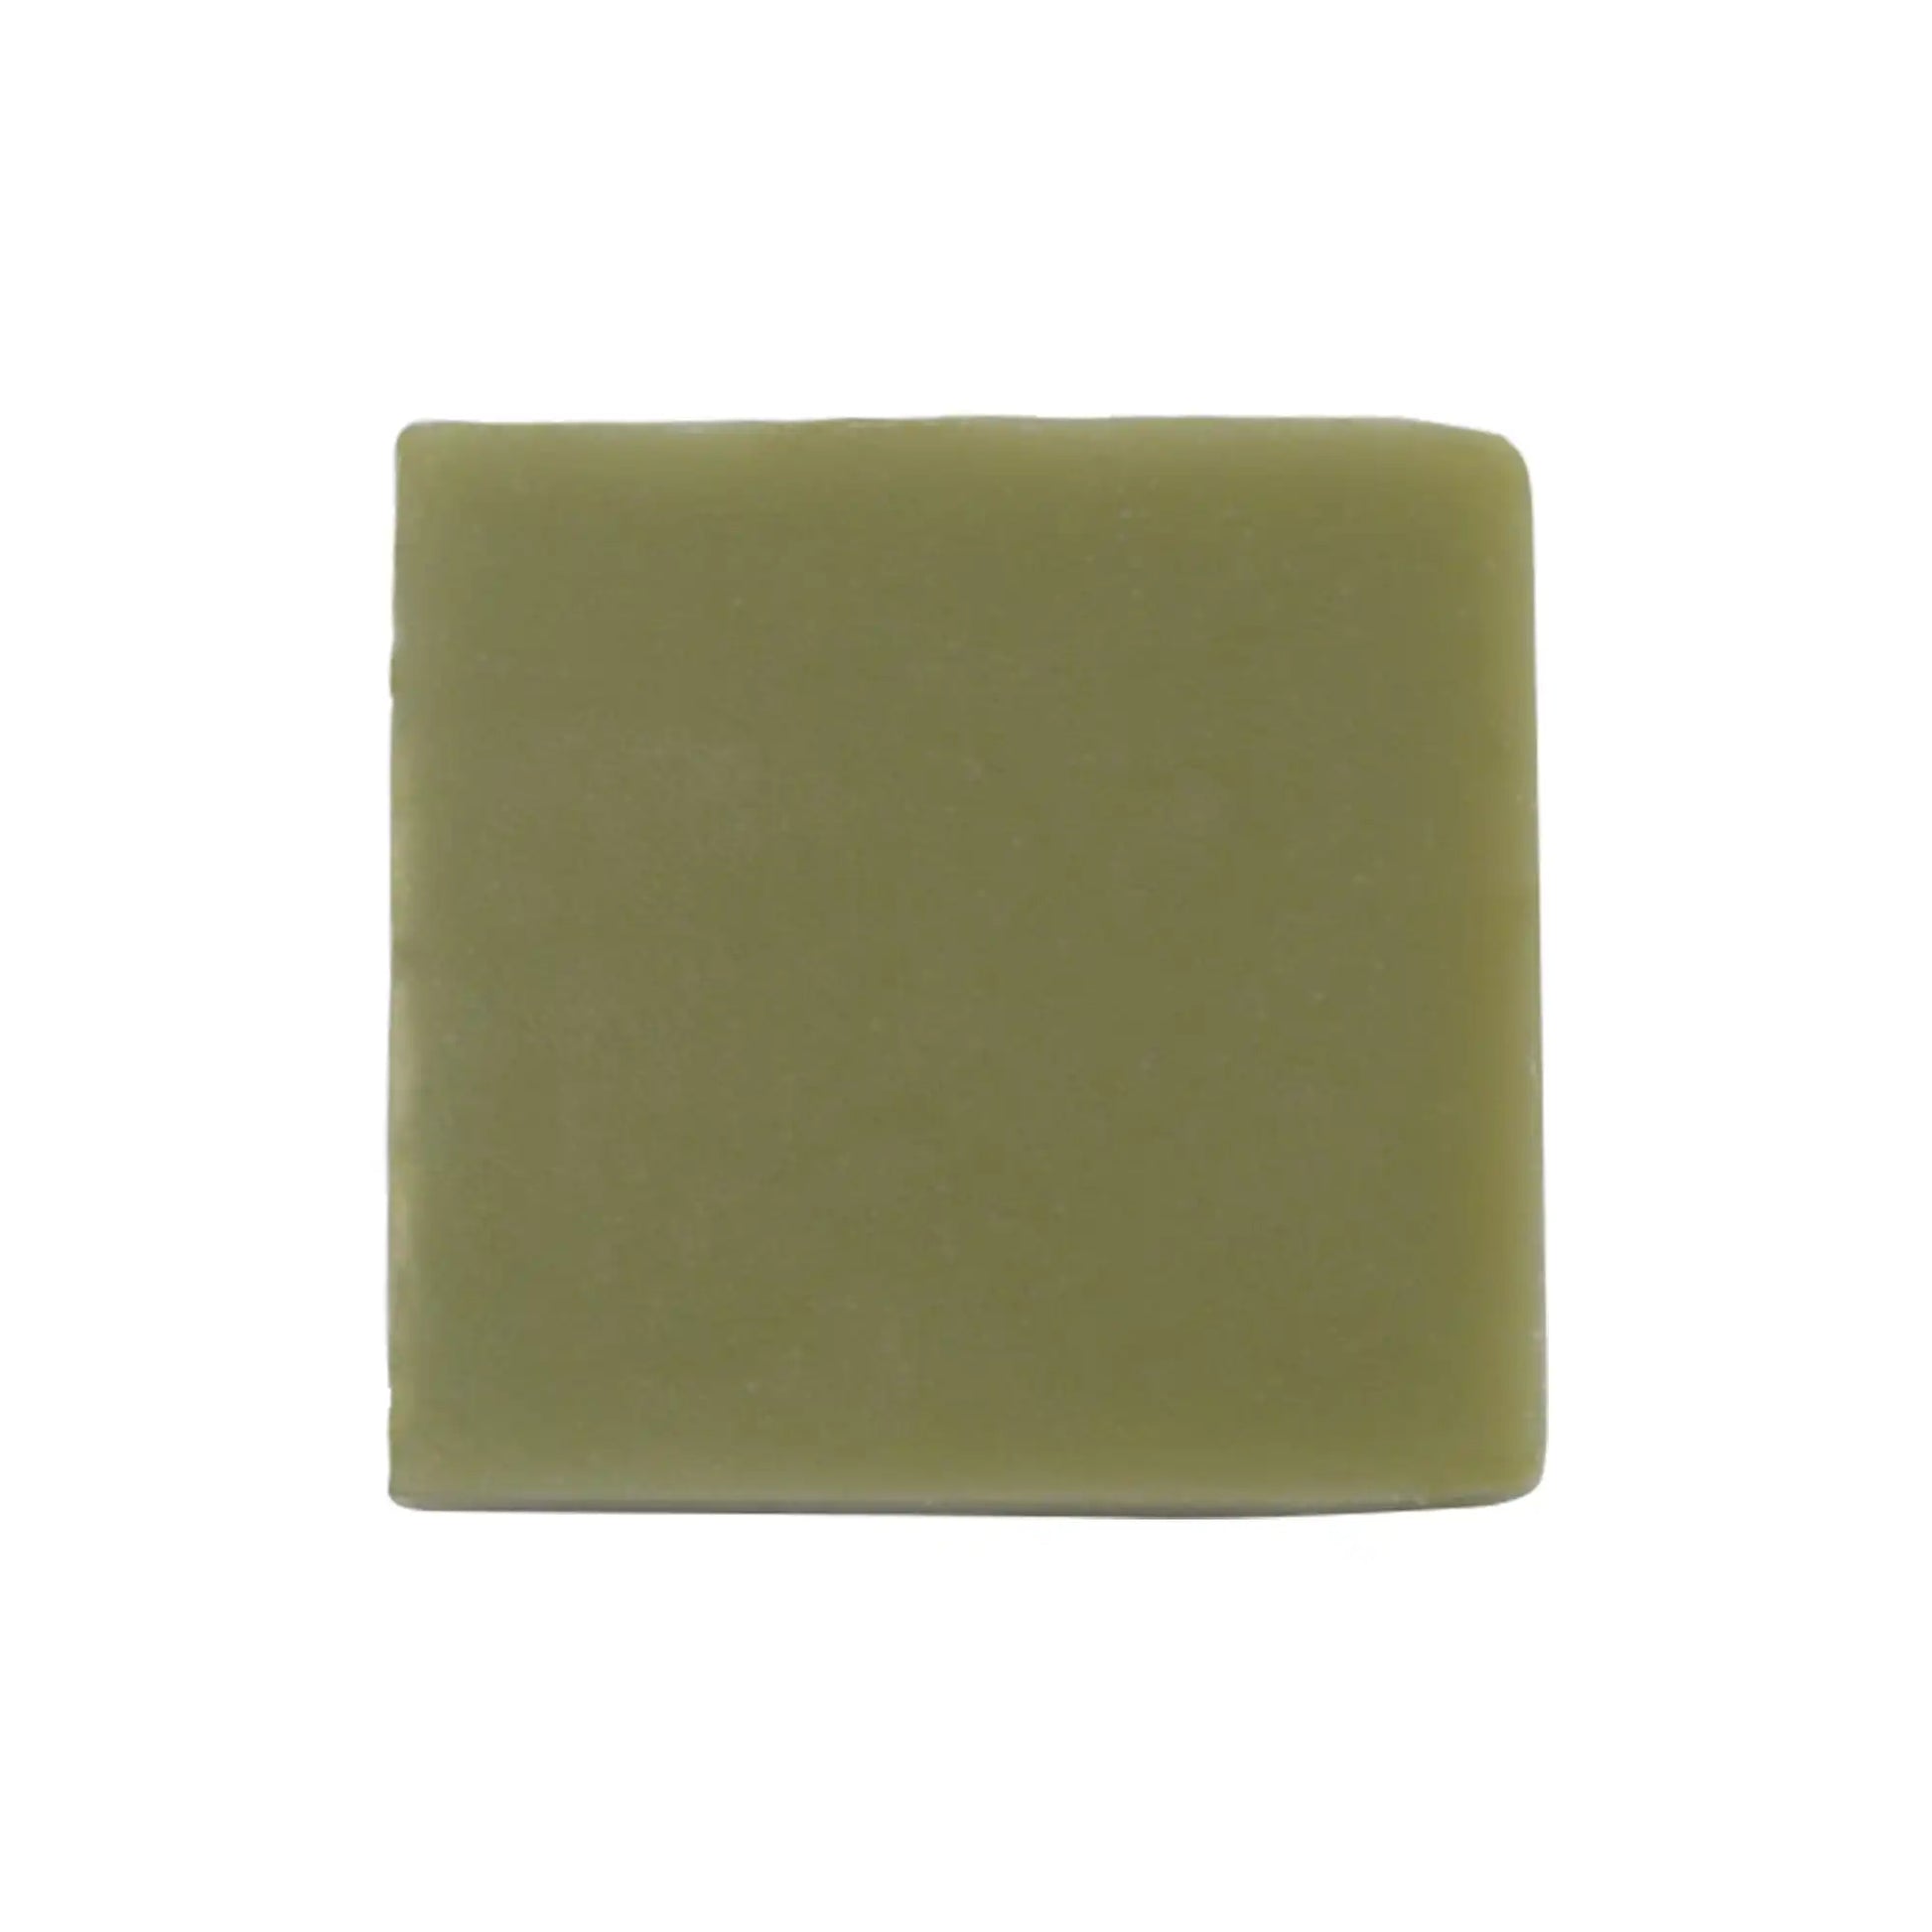 Aloe Rich Naturals Soap by Crjuisin Organics. Made with plant-based ingredients, this soap soothes and nourishes dry, itchy skin. Enriched with aloe vera, goat's milk, and shea butter, your skin will feel plump, glowing, and hydrated every time you use it. Suitable for body, face, and hands.